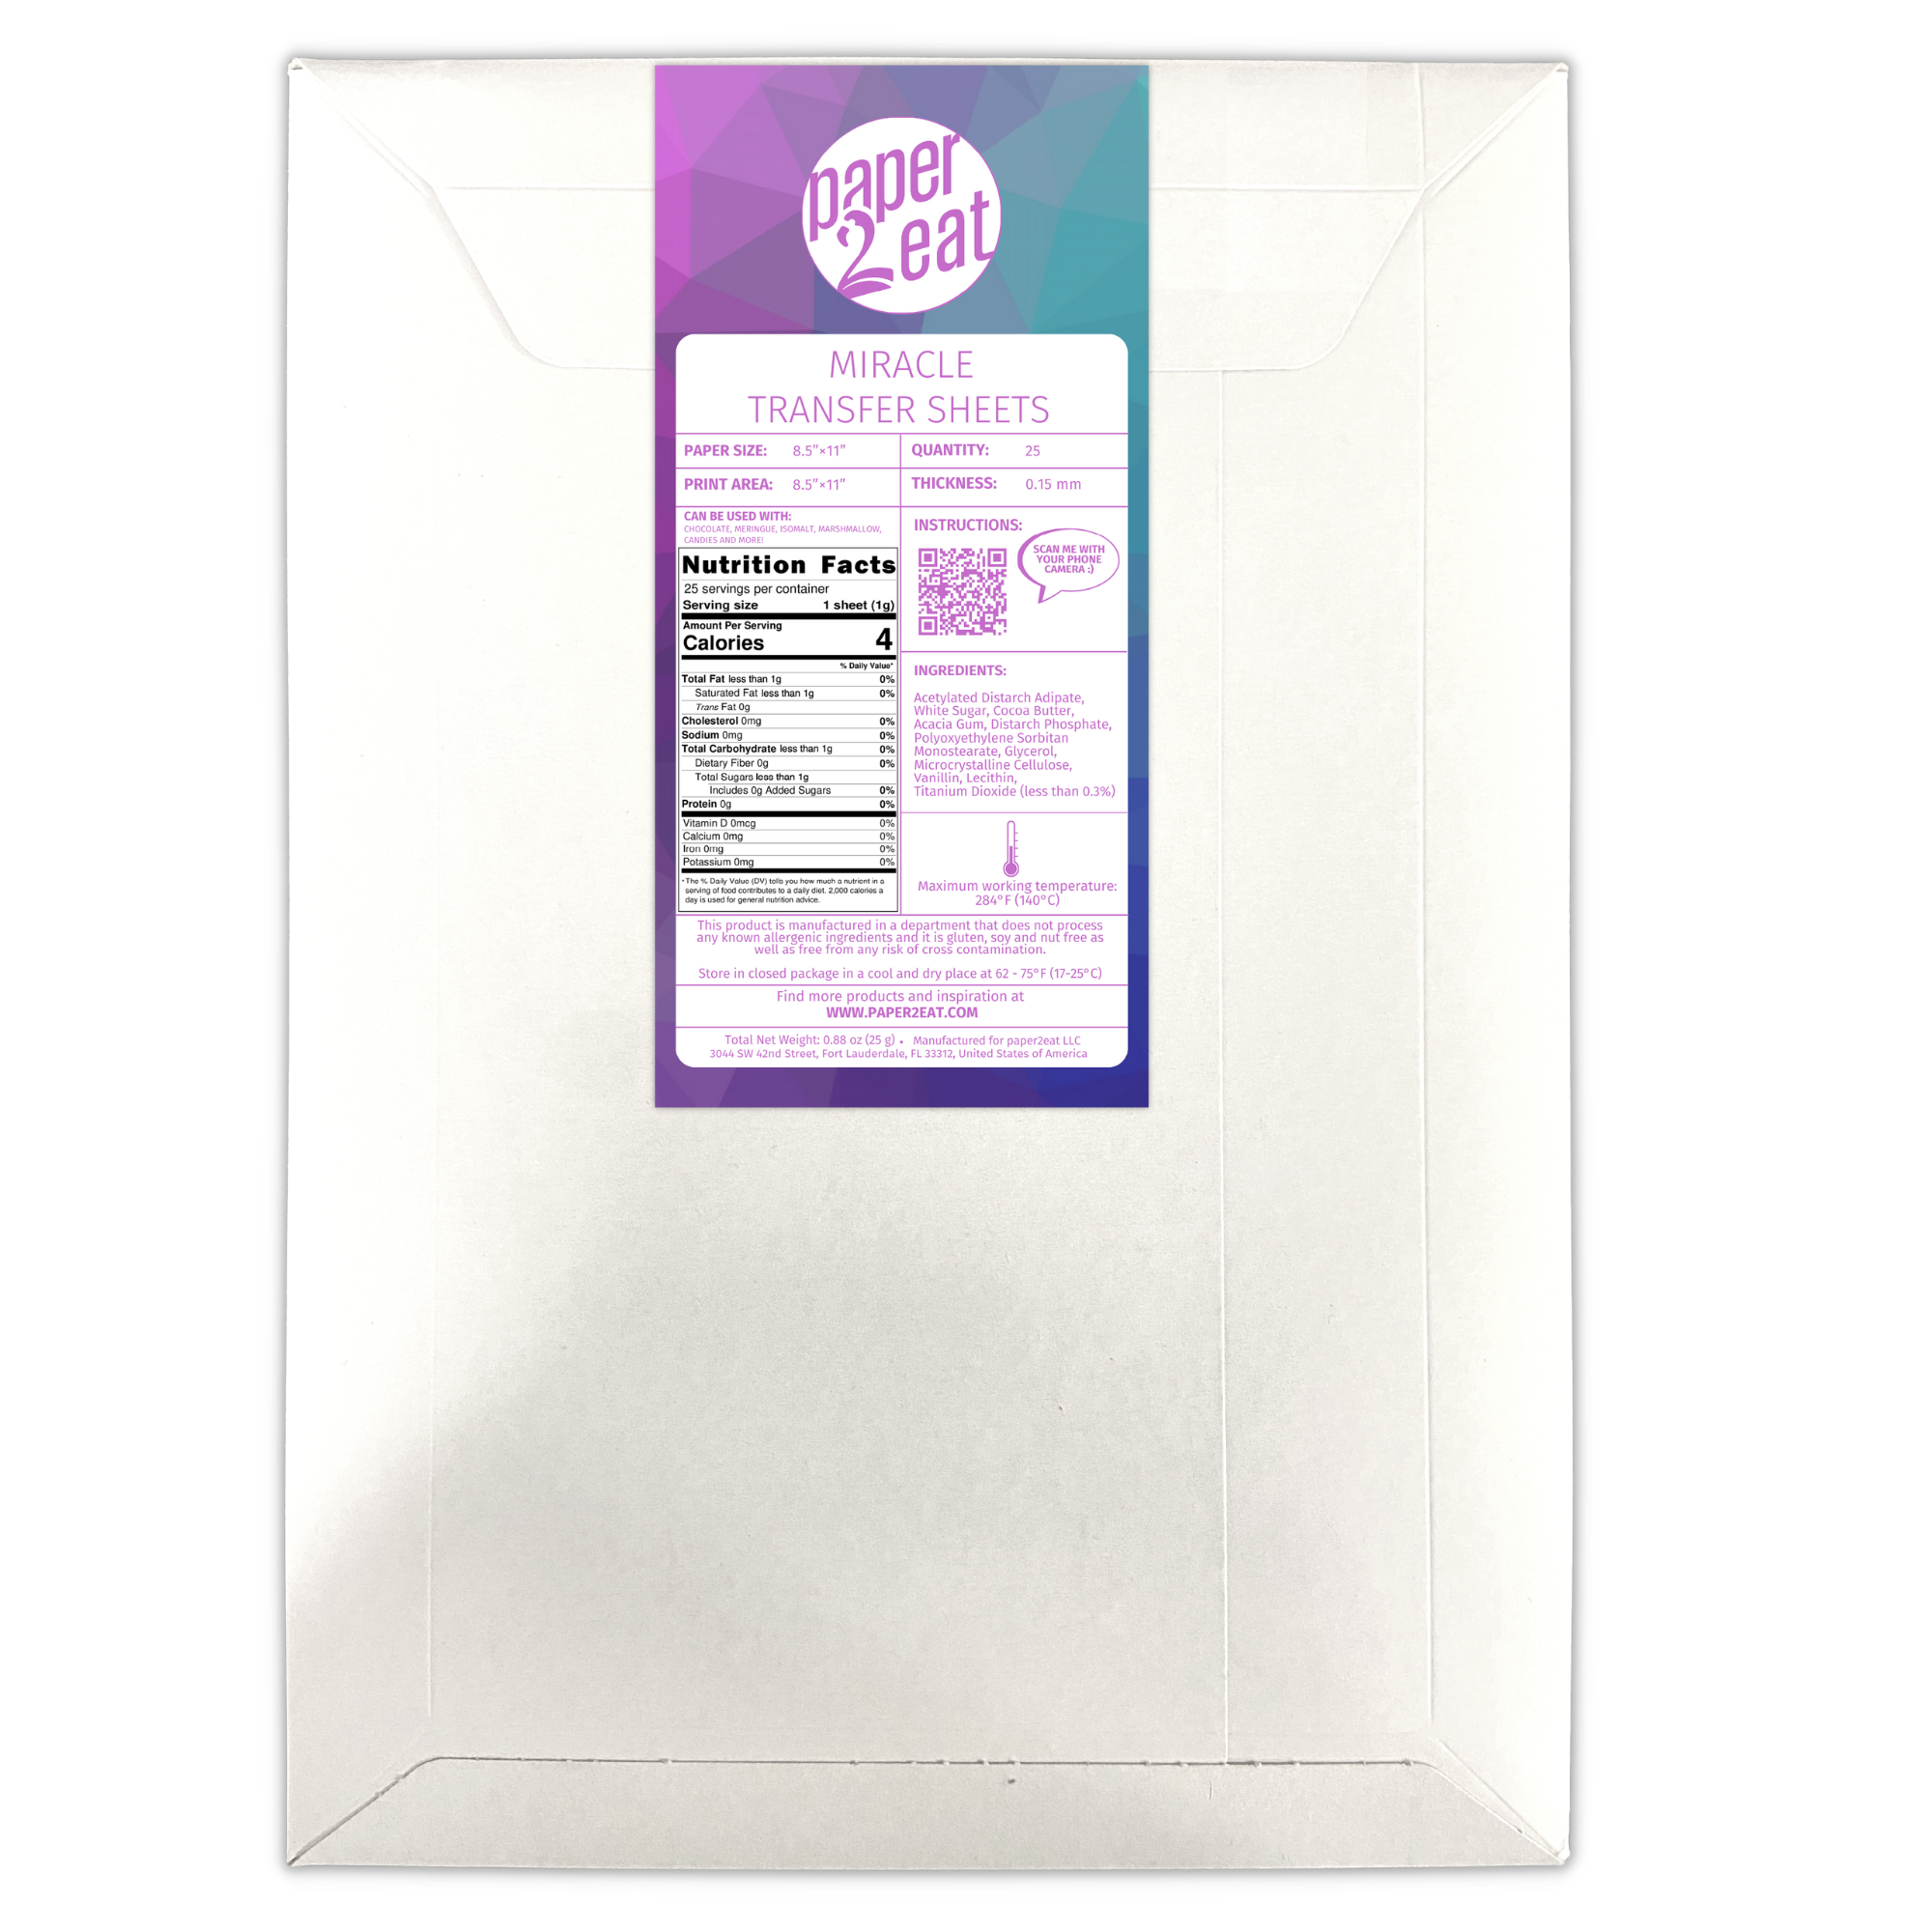 paper2eat Frosting Sheets Premium (Icing Sheets) 8.5“ x 11“ – 24 count –  White Edible Printer Paper